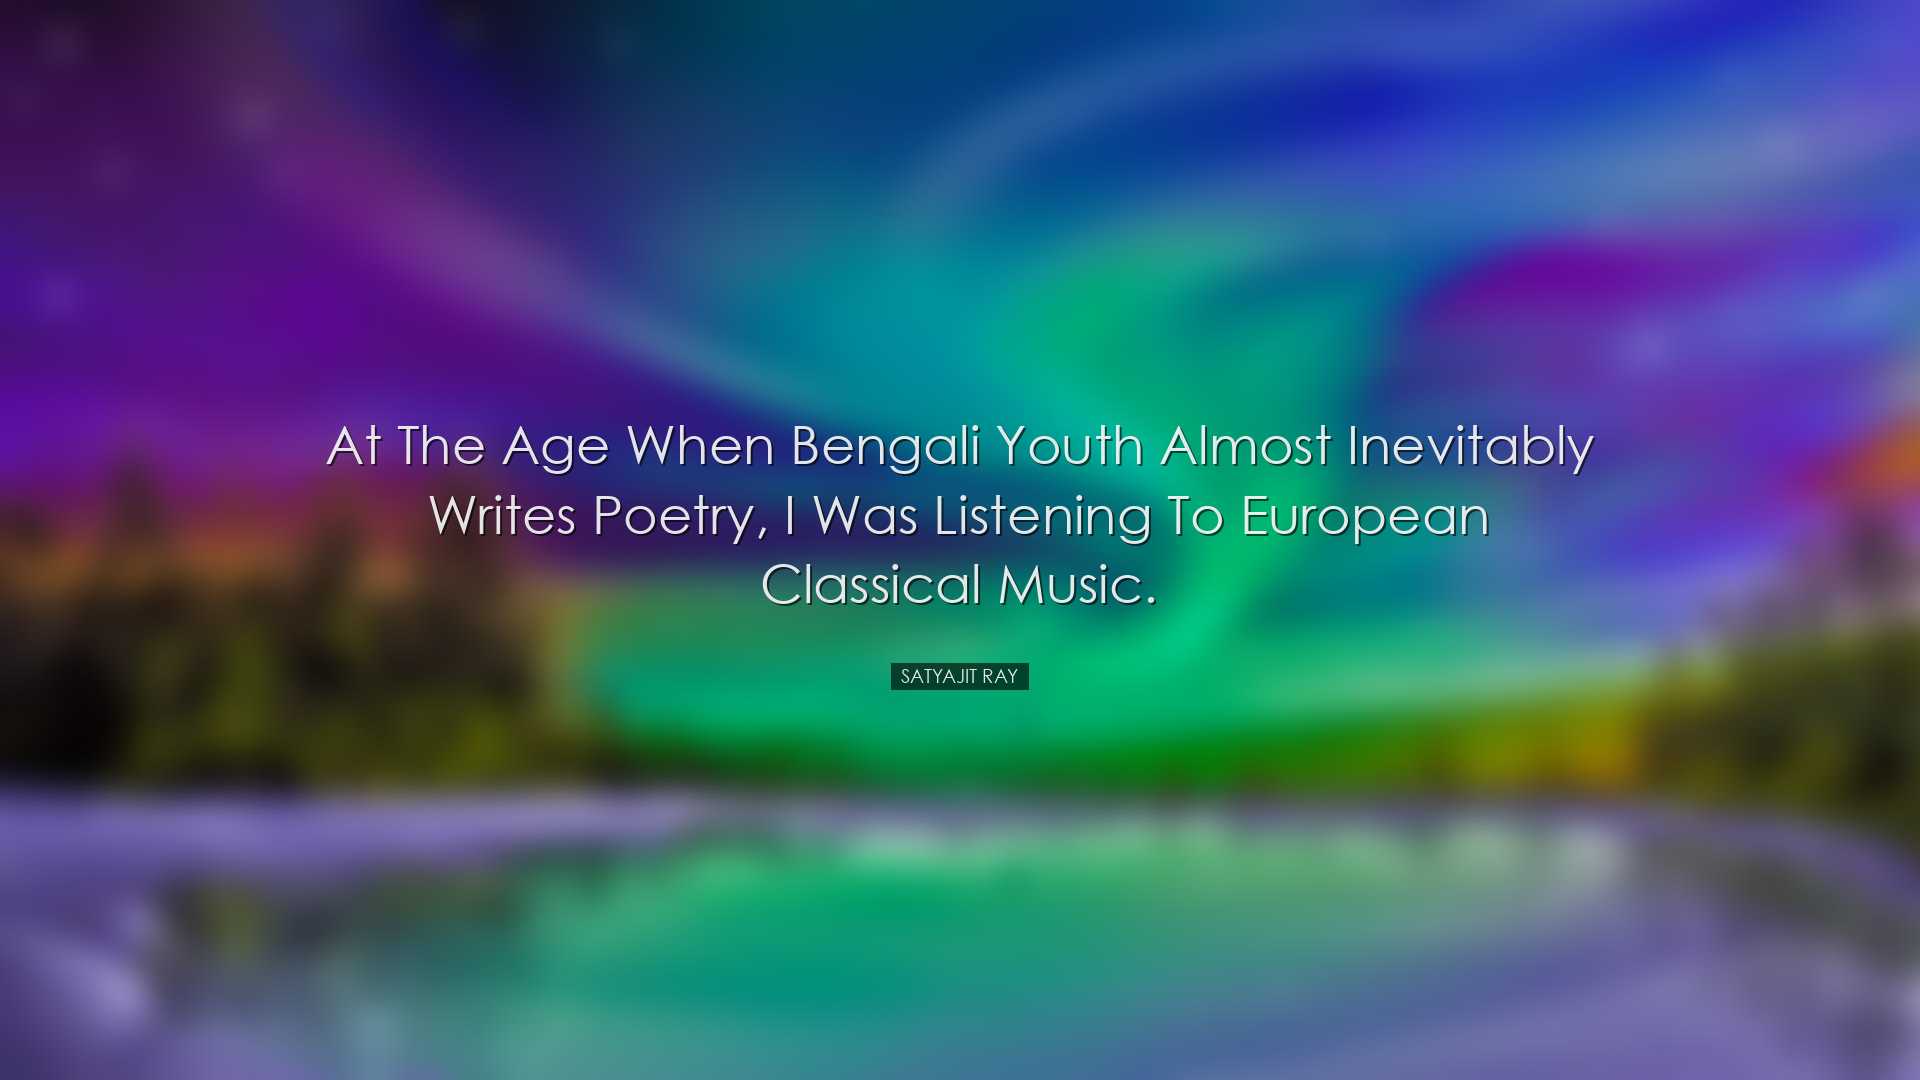 At the age when Bengali youth almost inevitably writes poetry, I w